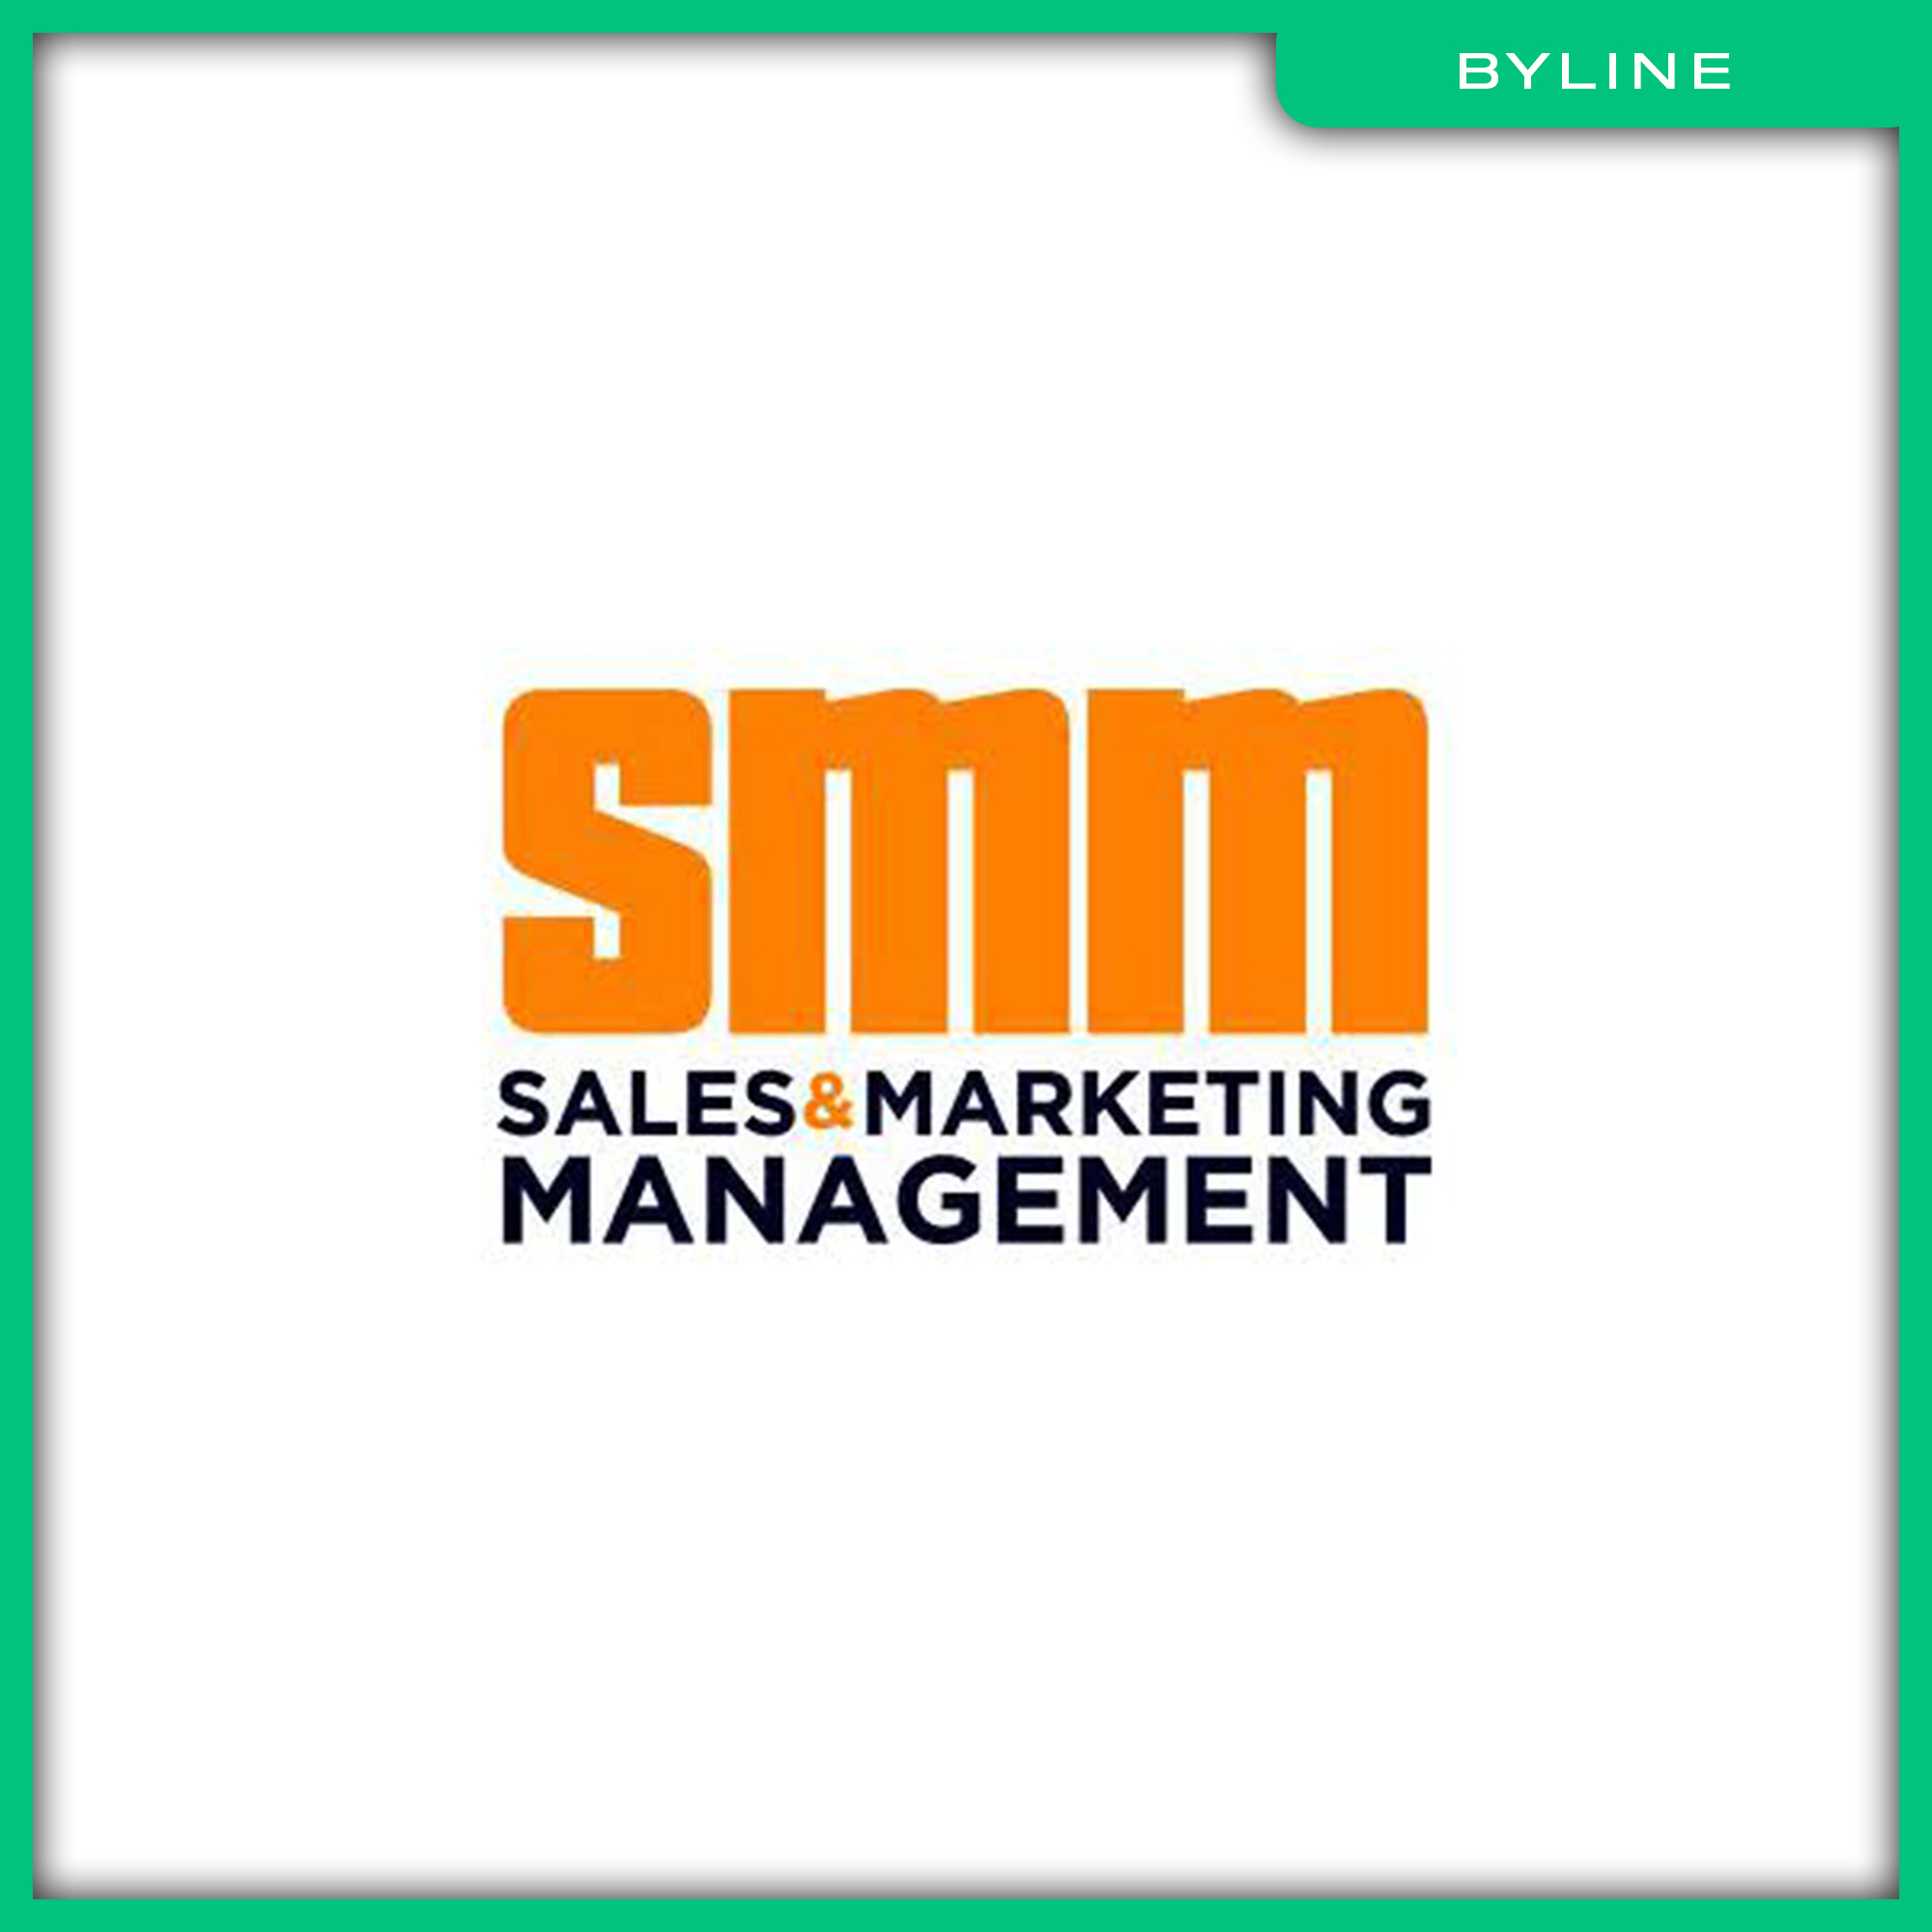 13-Byline--Sales-&-Marketing-Management--How-Podcasting-Can-Engage-B2B-Buyers-